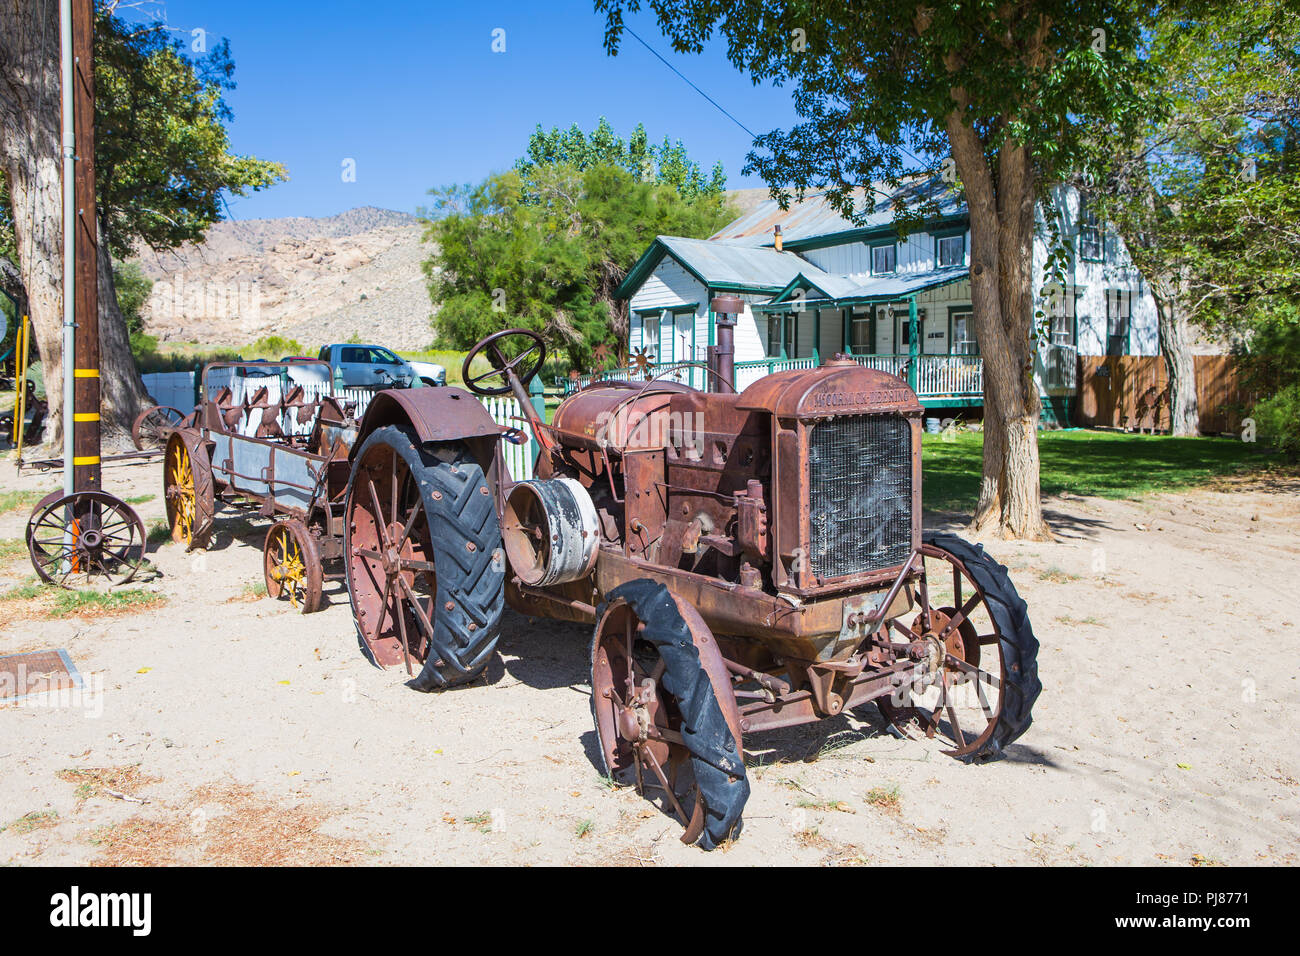 Old Mccormick-Derring tractor. The trademark name of a line farm machinery manufactured by the International Harvester Company. Benton hot springs Ca Stock Photo